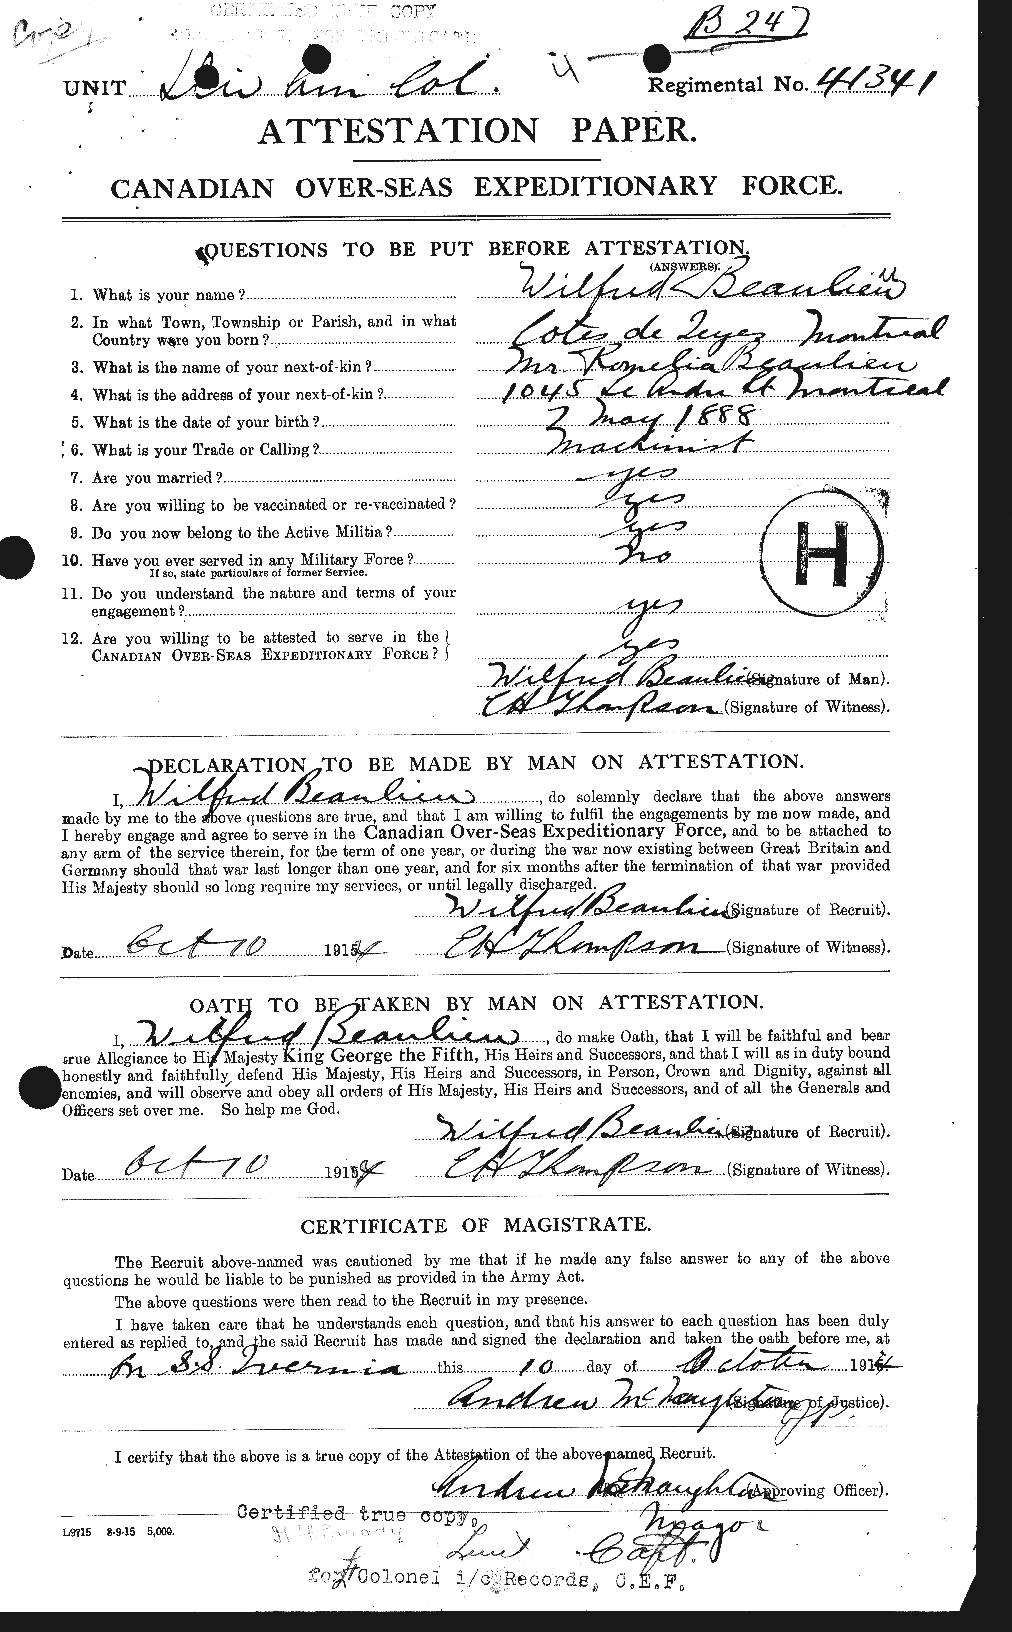 Personnel Records of the First World War - CEF 233100a